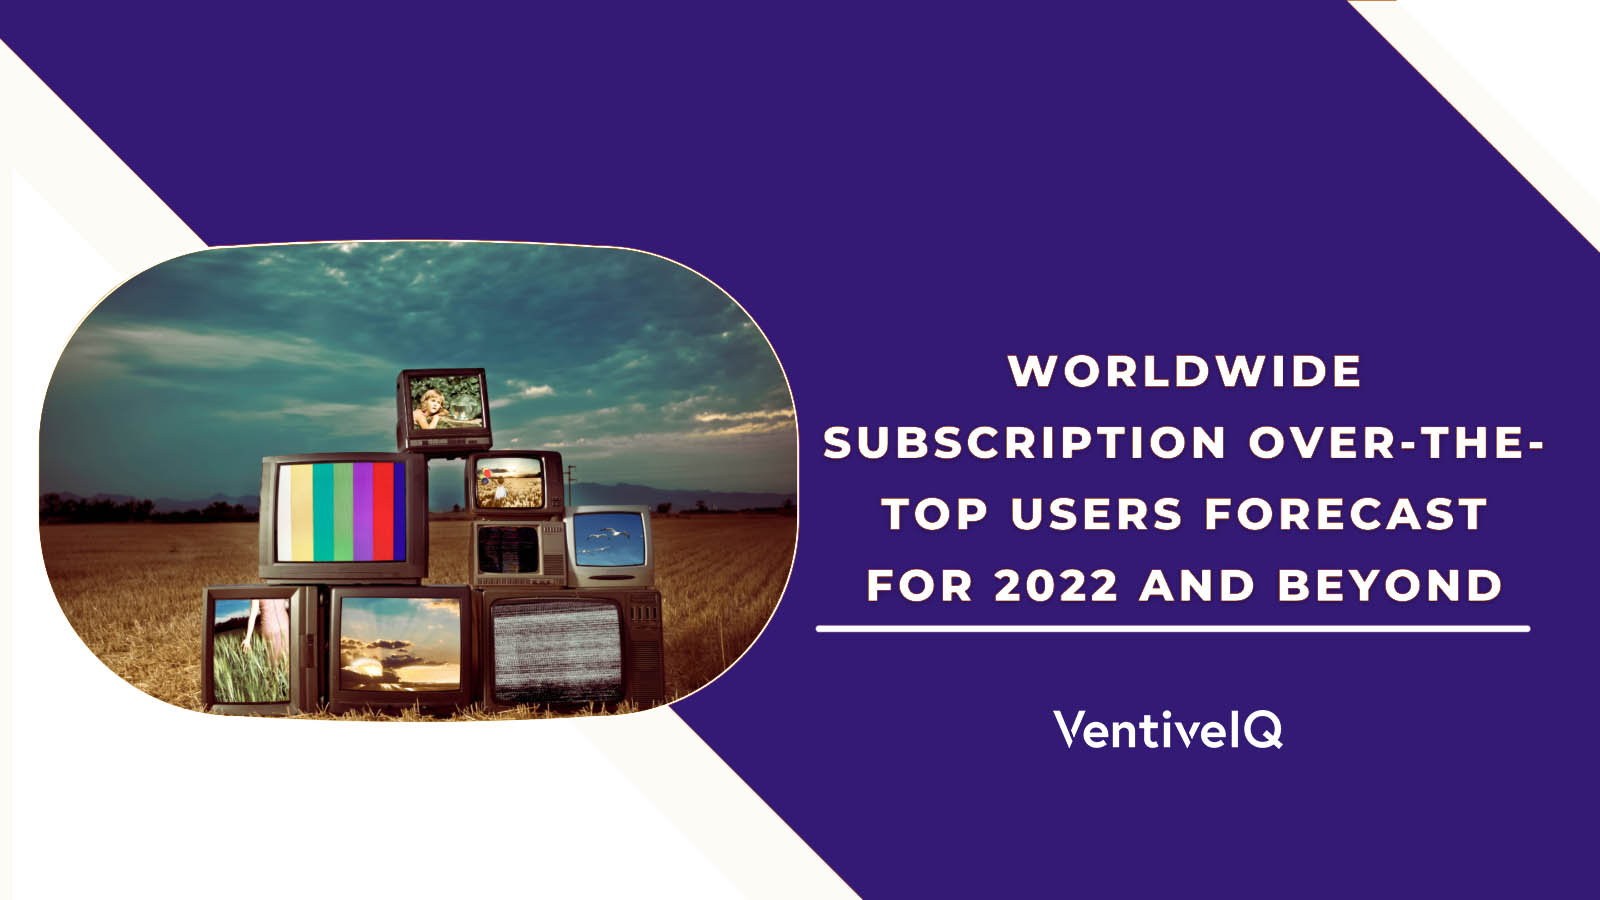 Worldwide Subscription over-the-top users forecast for 2022 and beyond.